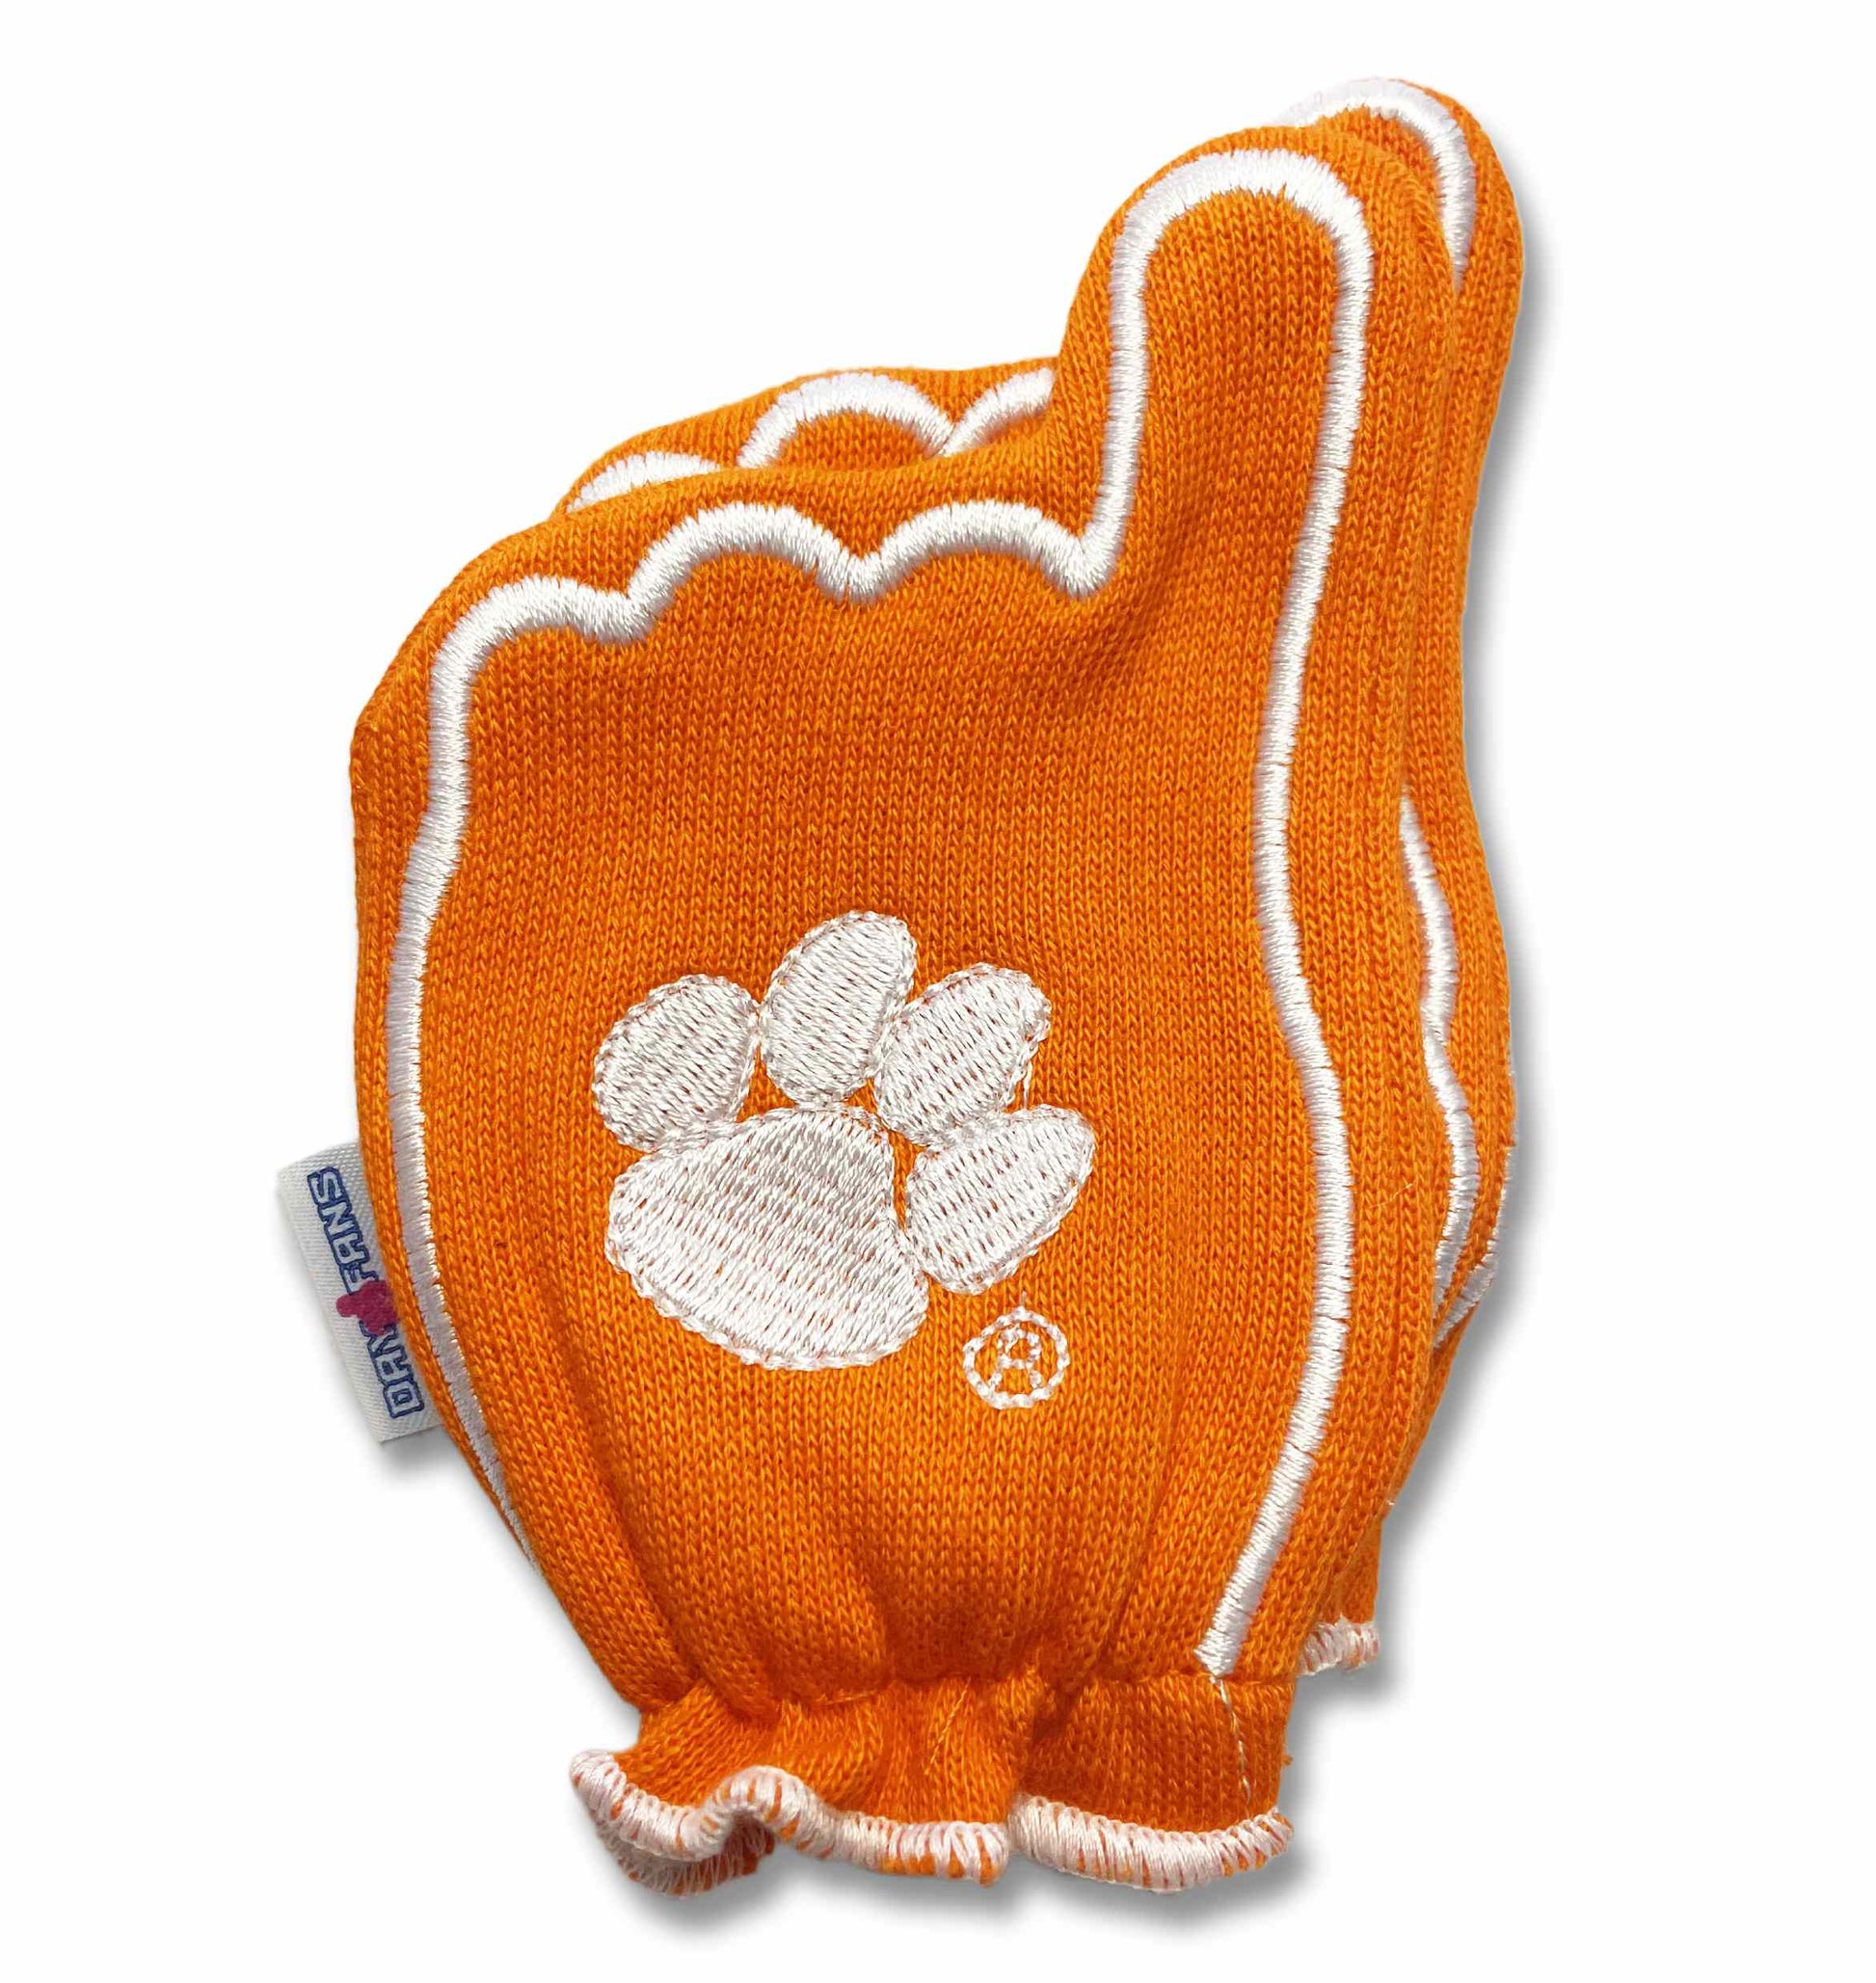 Clemson Go Tigers FanMitts Baby Mittens Orange Back Pair Stacked